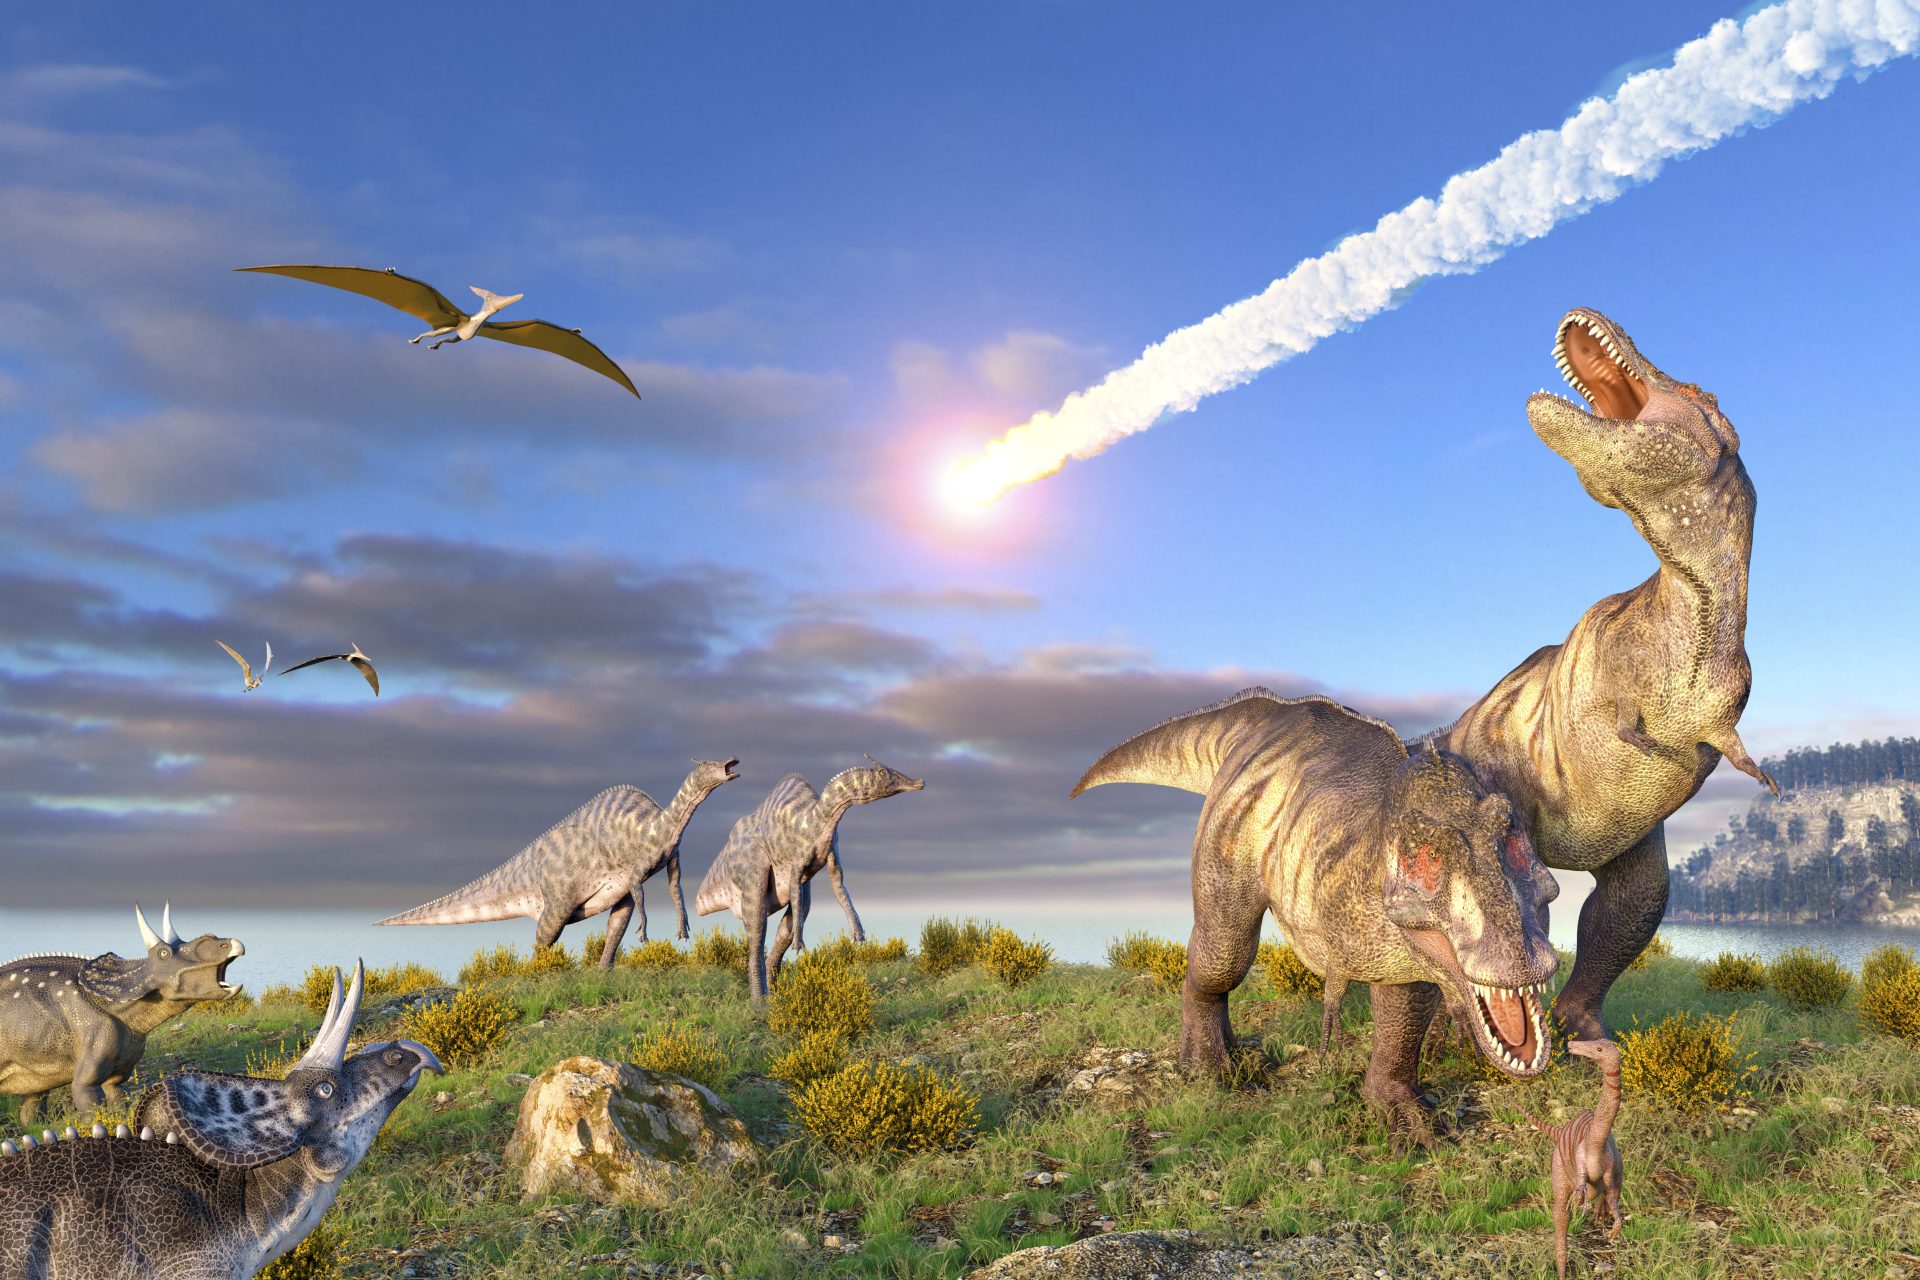 Dinosaurs were always doomed to death even if they weren't wiped out by an asteroid